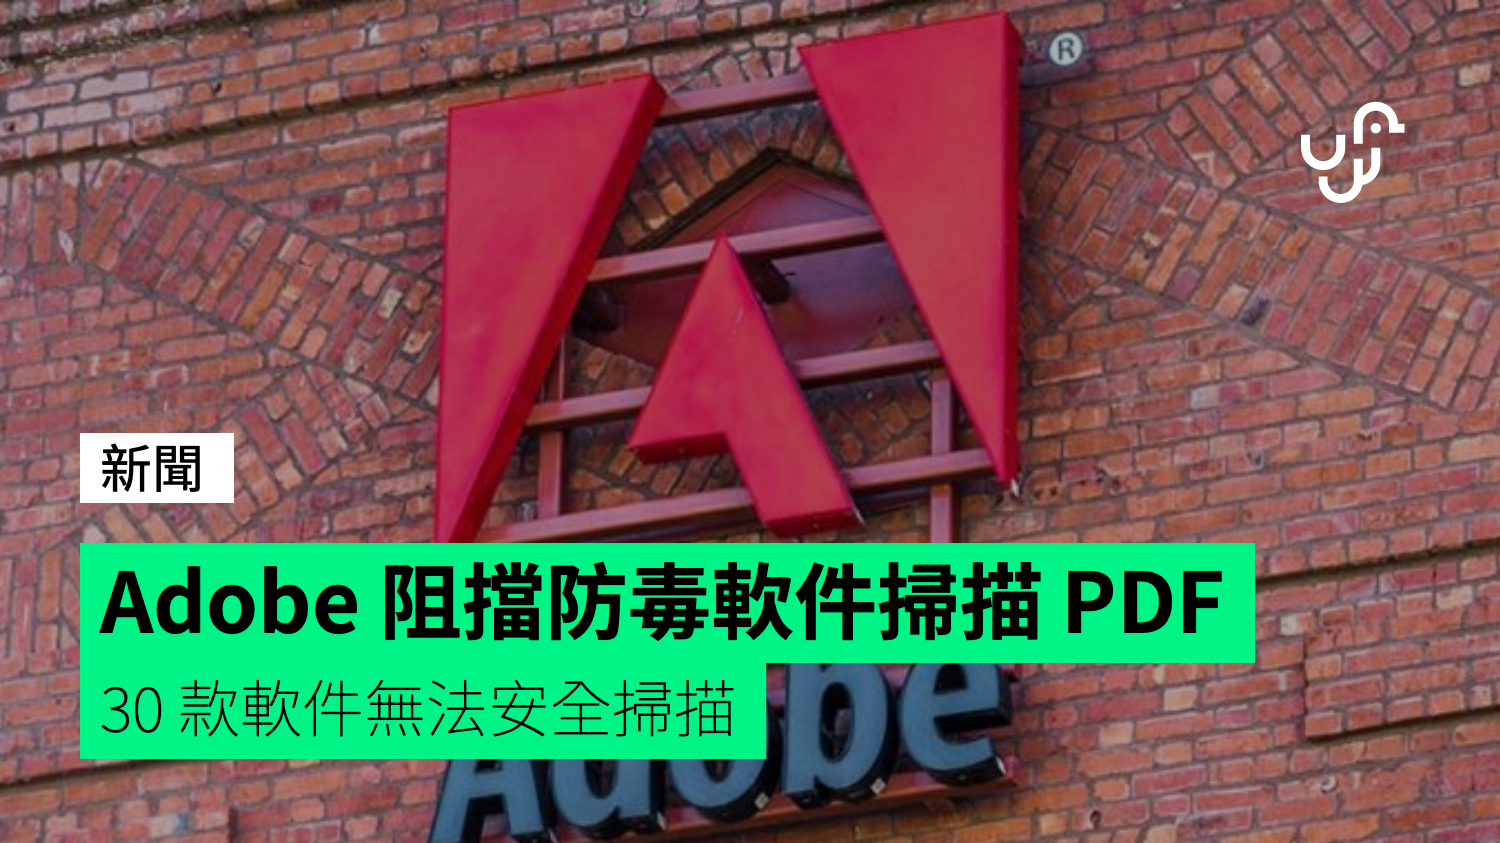 Adobe Blocks Antivirus From Scanning PDFs 30 Software Can’t Scan Safely